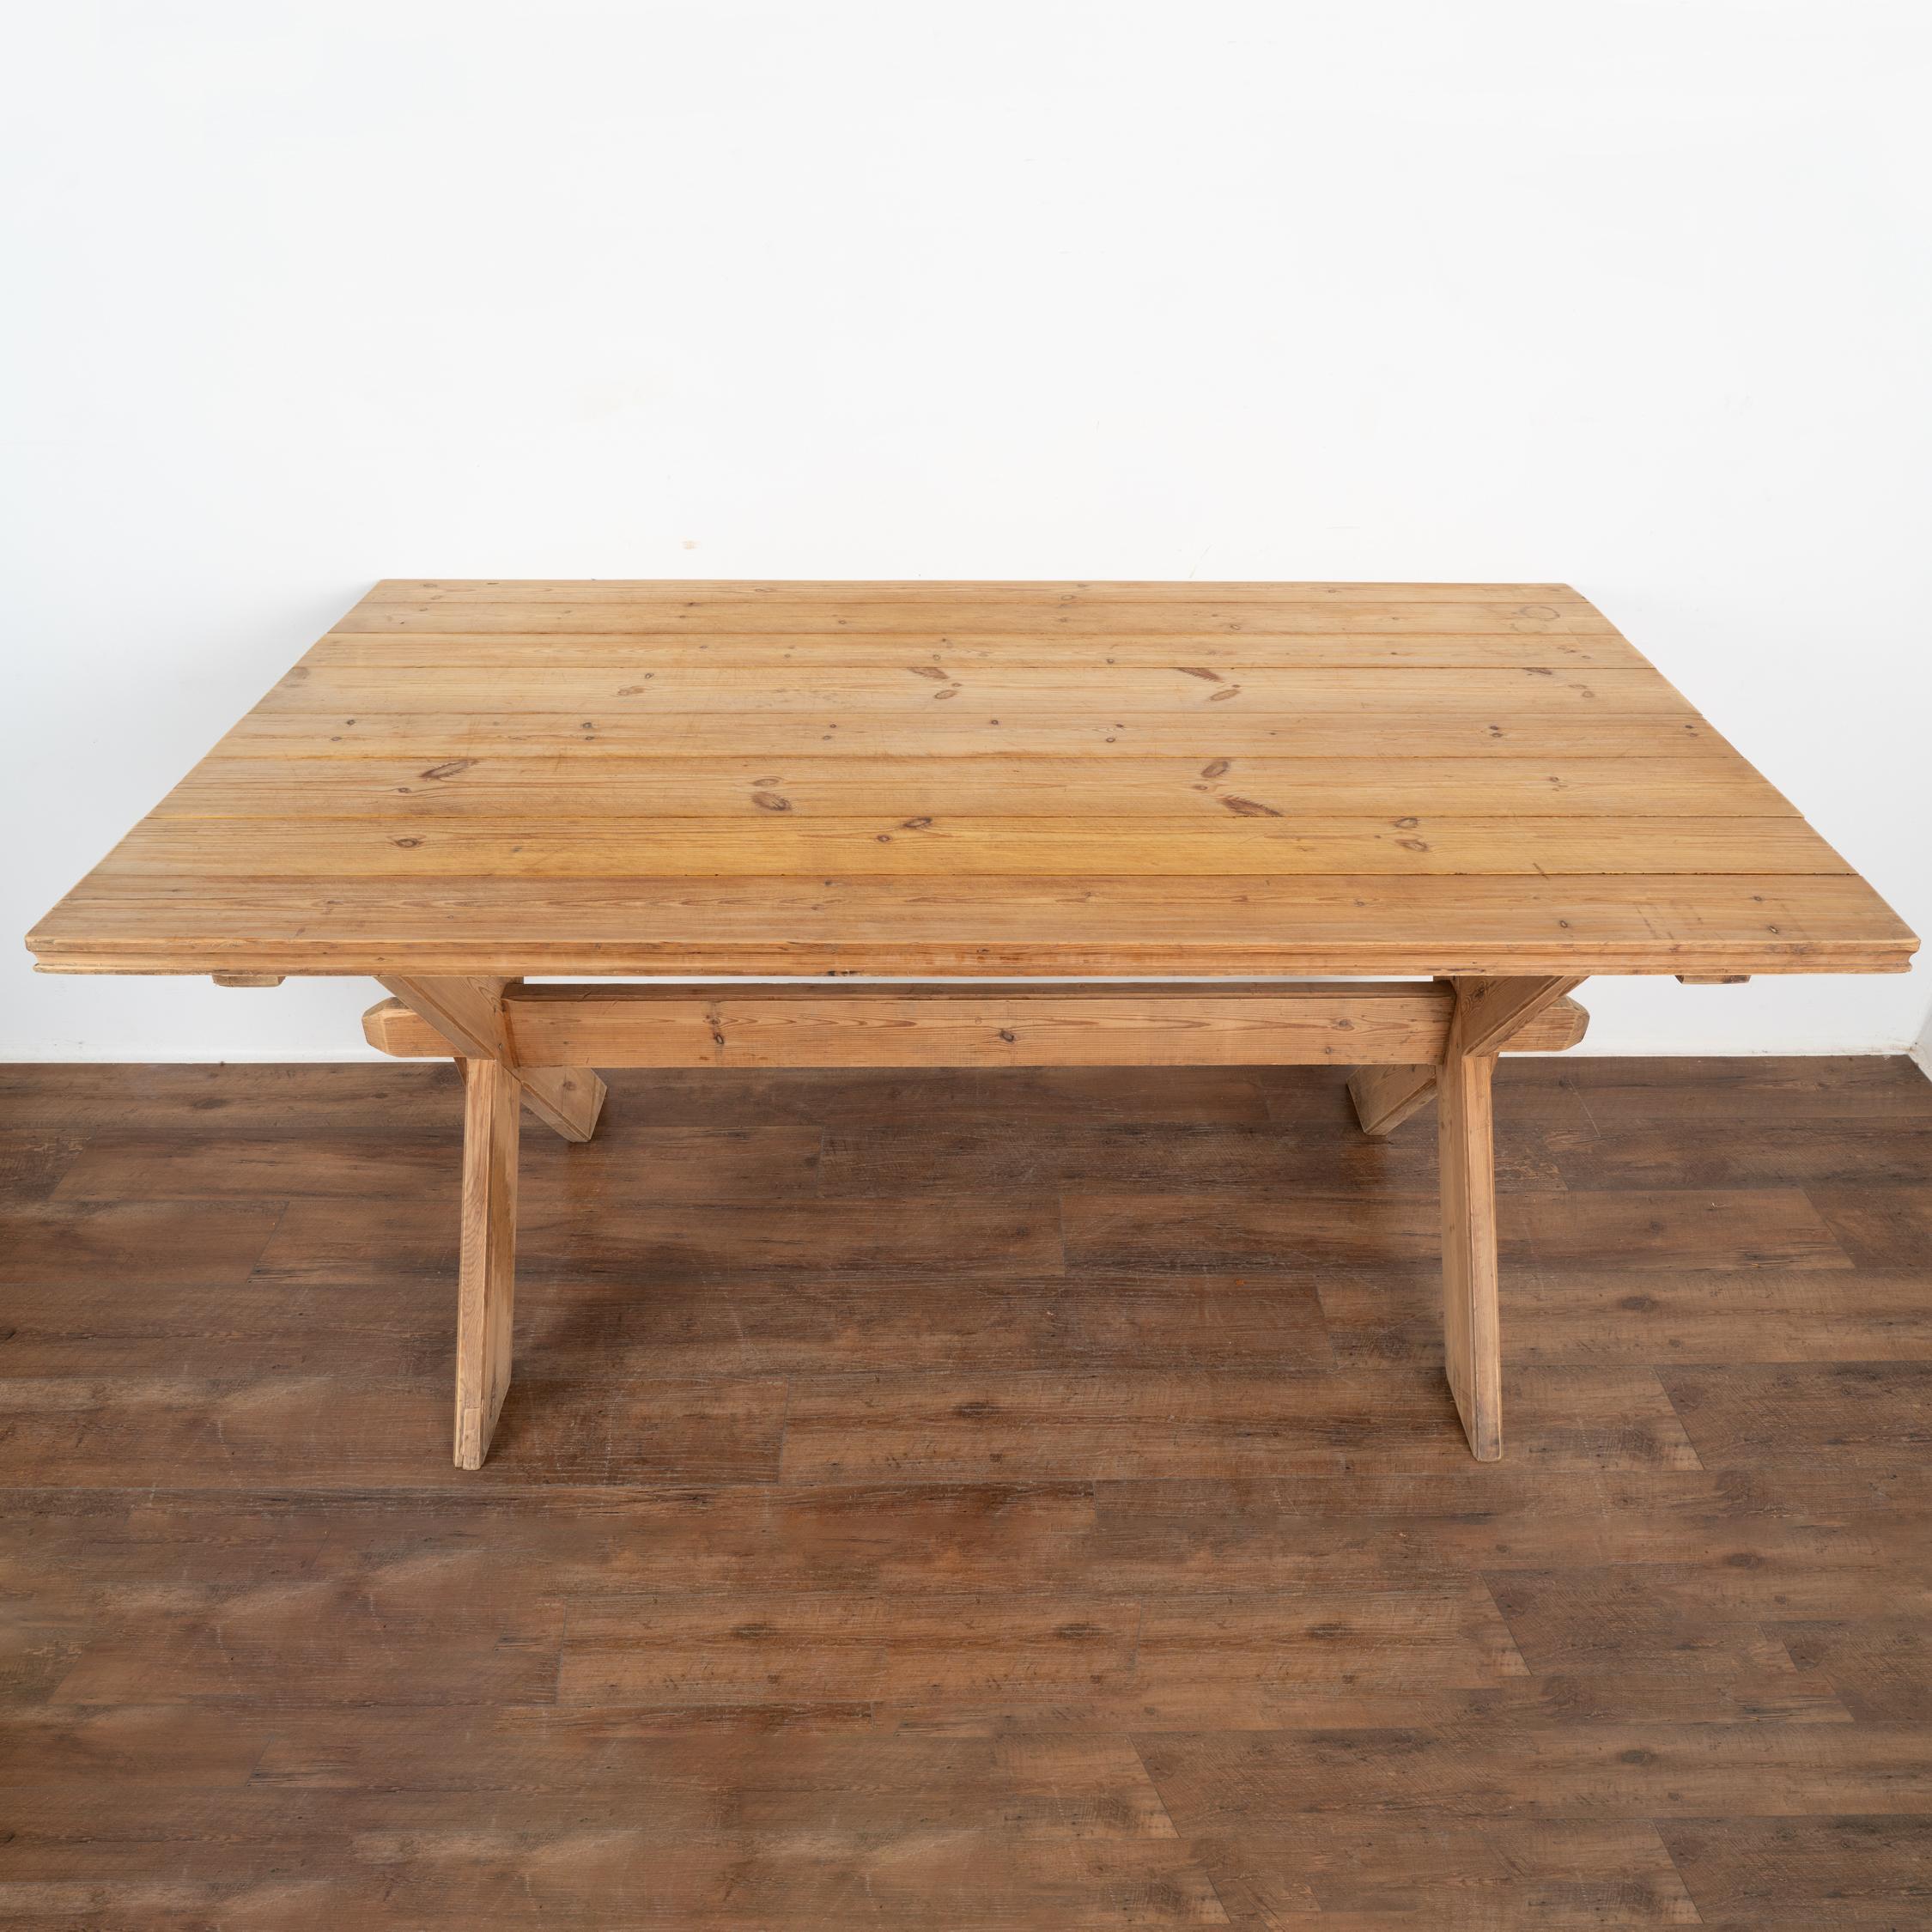 Hungarian Antique Pine Farm Table Dining Table with Trestle Base, Hungary circa 1880 For Sale